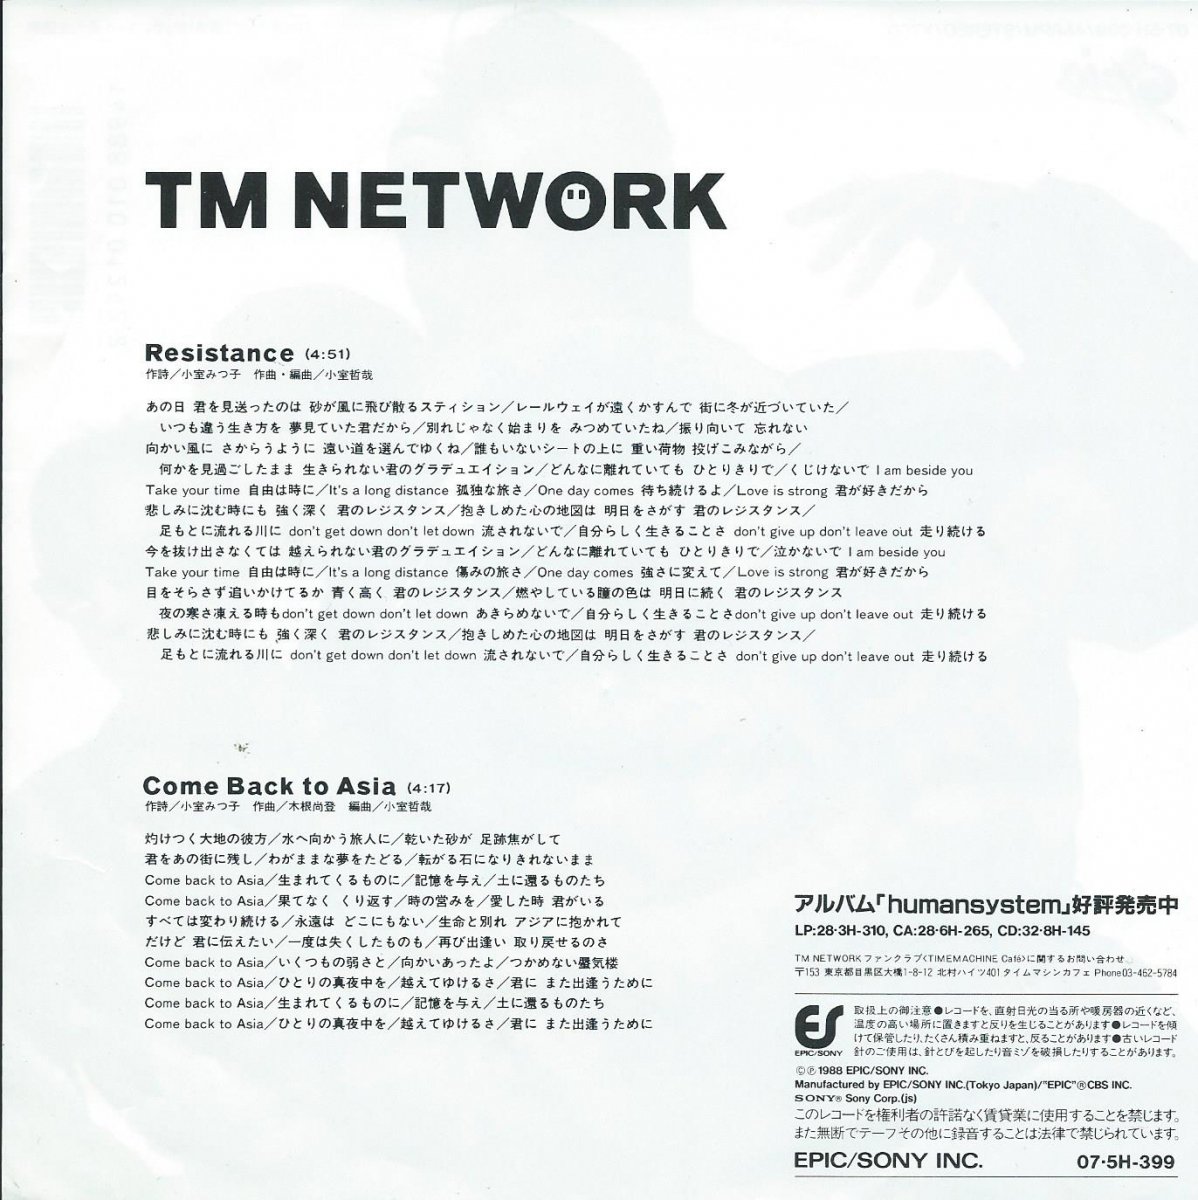 TM NETWORK RESISTANCE COME BACK TO ASIA (7